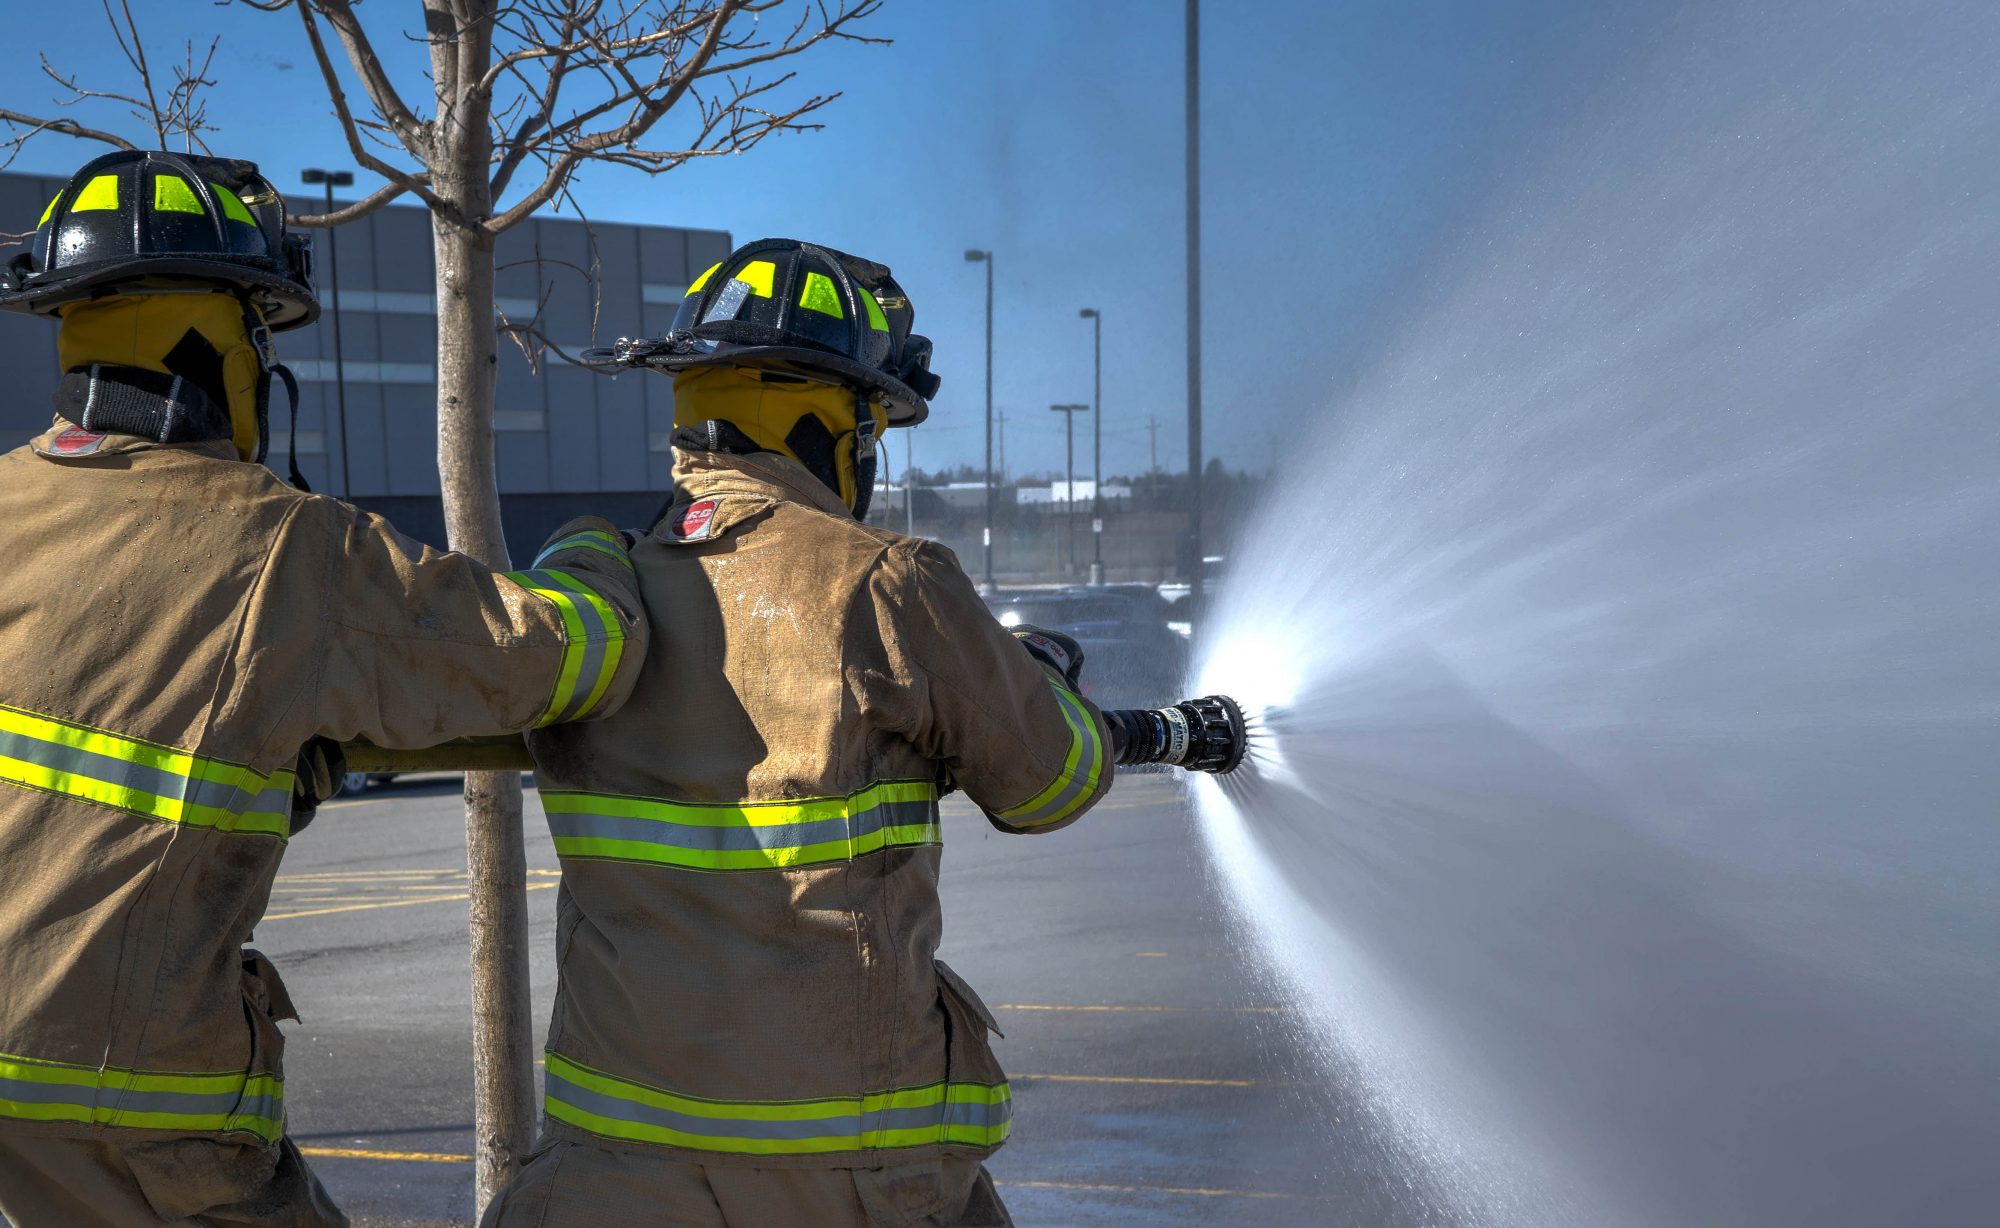 Can Fire Protection Go With Protection?